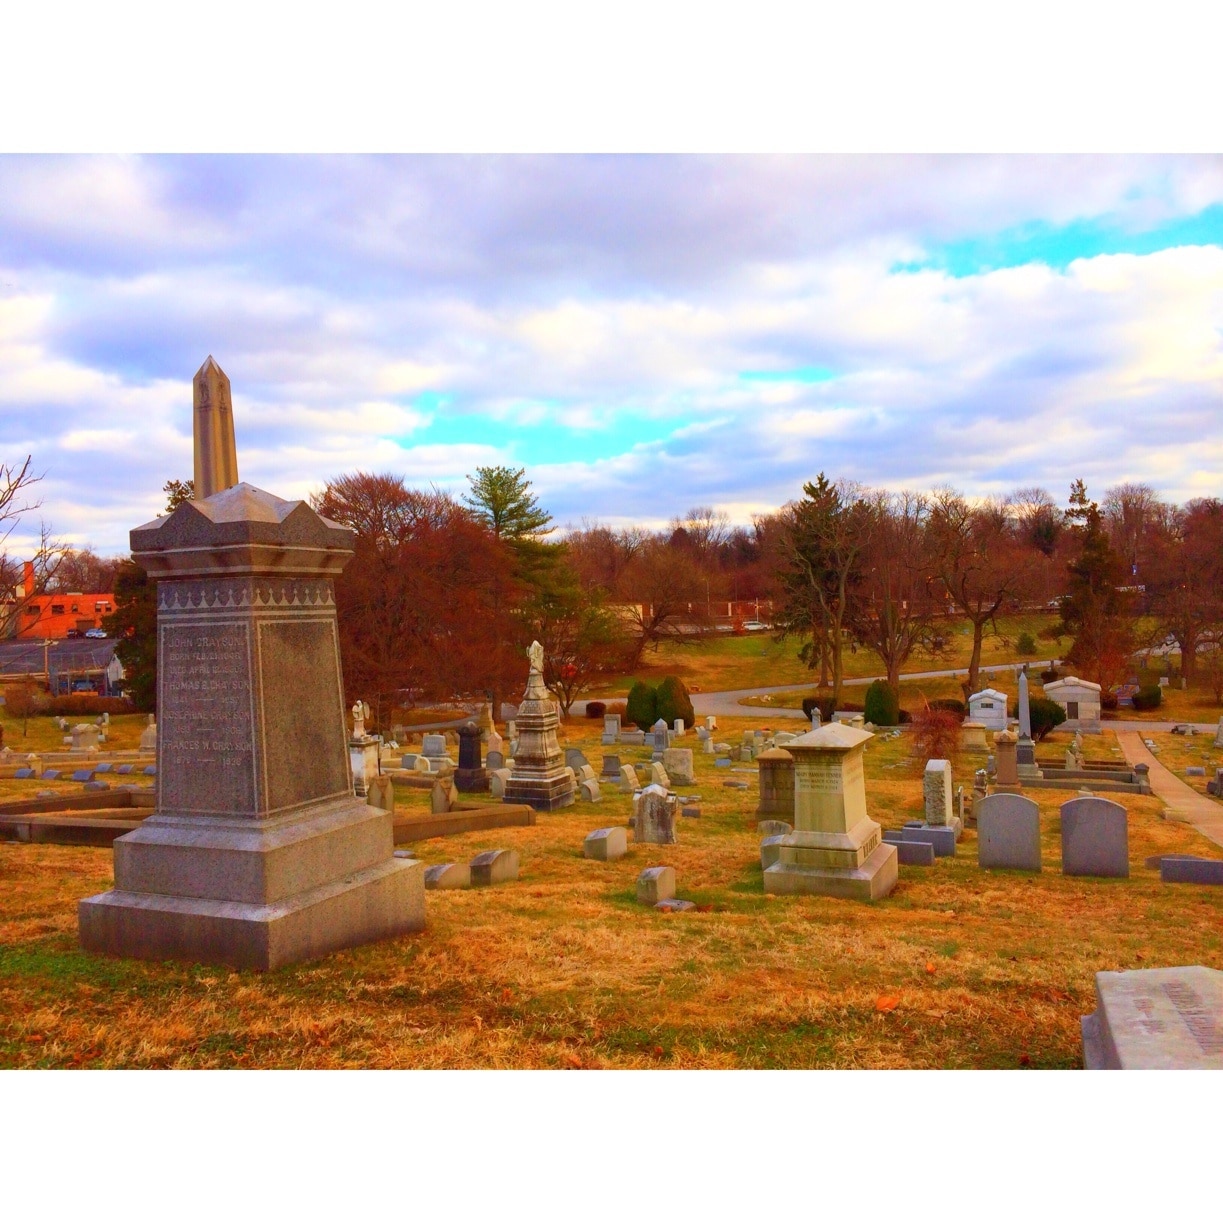 The laurel hill cemetery is near Fairmount Park in Philadelphia, Pennsylvania. It was interesting to see one of the oldest and largest cemeteries in all of the United States and eerie old tombstones. It was amazing to see the larger ones that had generations of families buried in them 